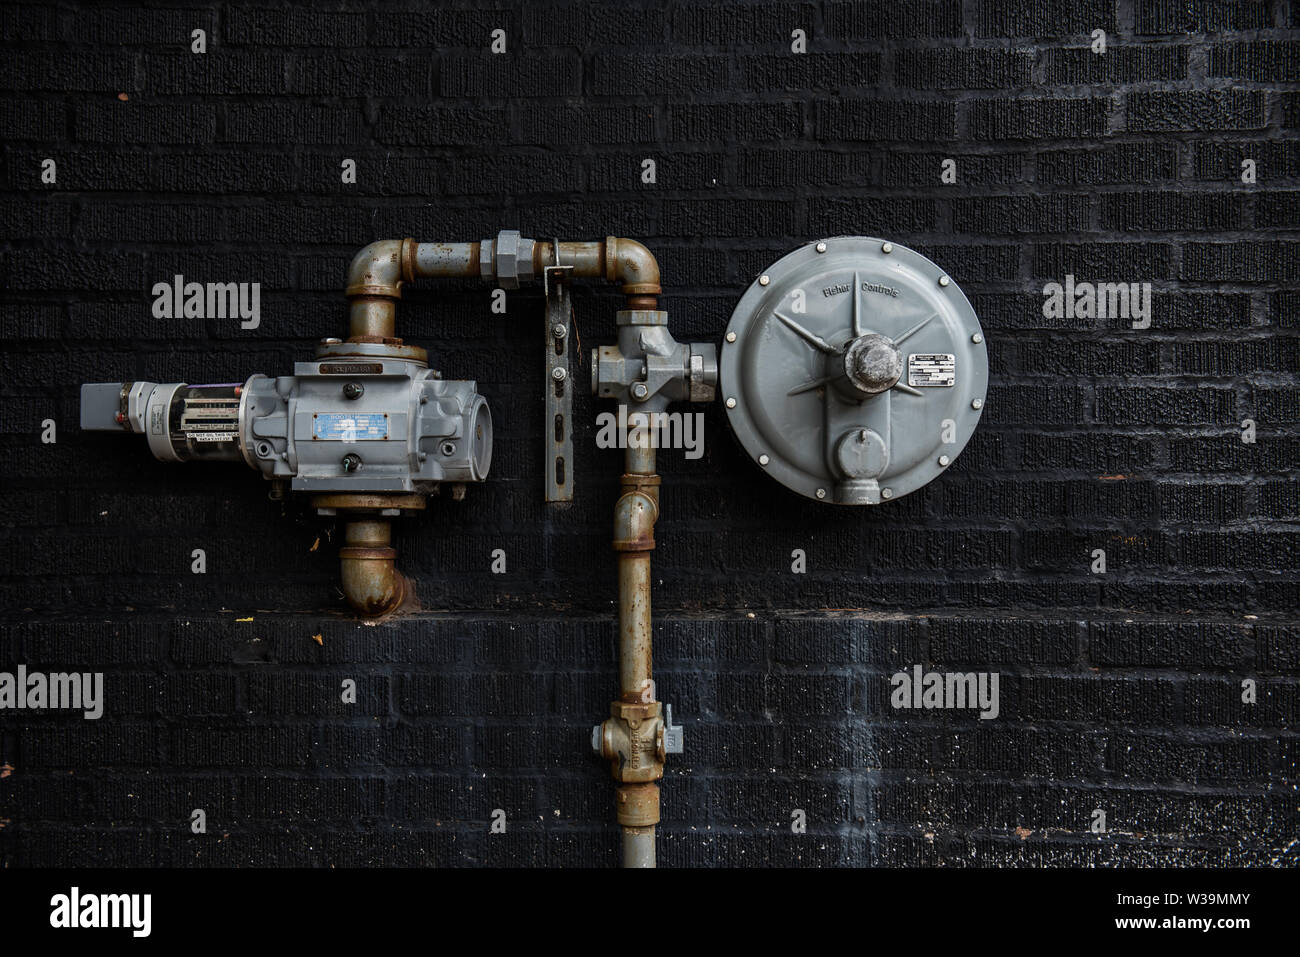 Gas meter mounted on black brick wall on west Belmont avenue, Chicago Illinois, Stock Photo